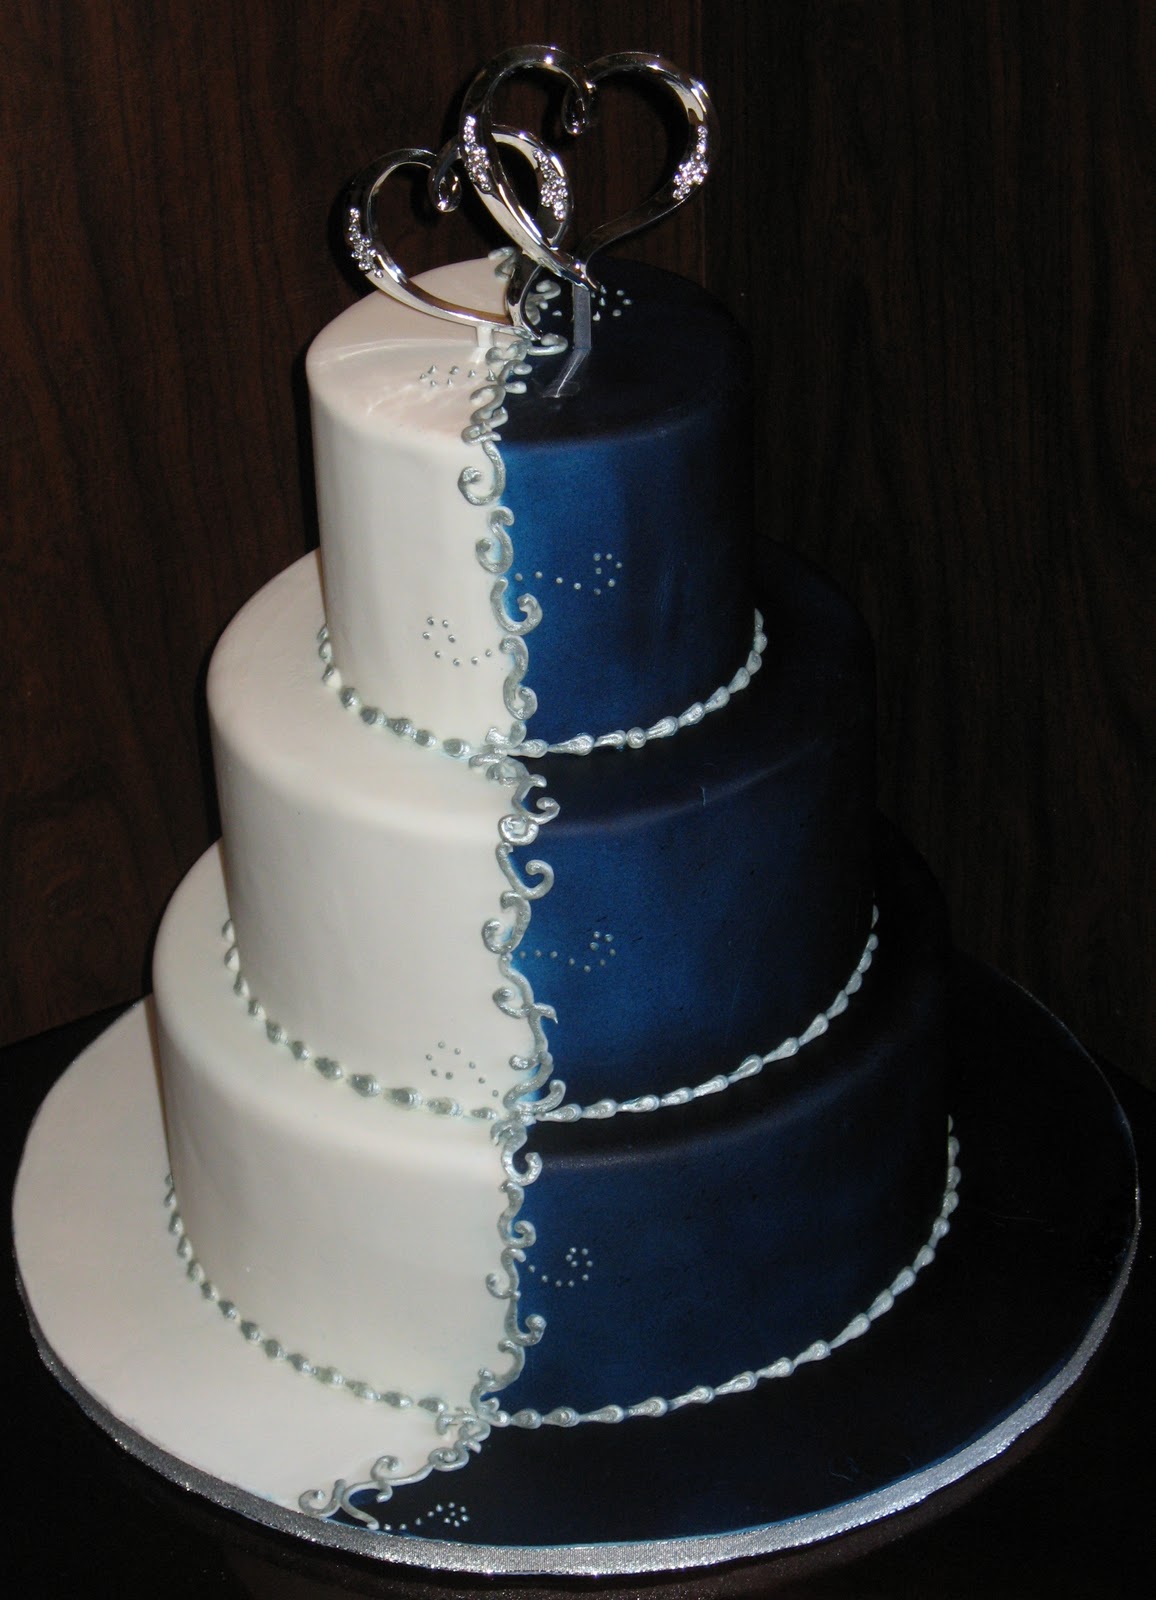 blue-and-silver-wedding-cakes-awesome-3-on-cake-wedding-ideas